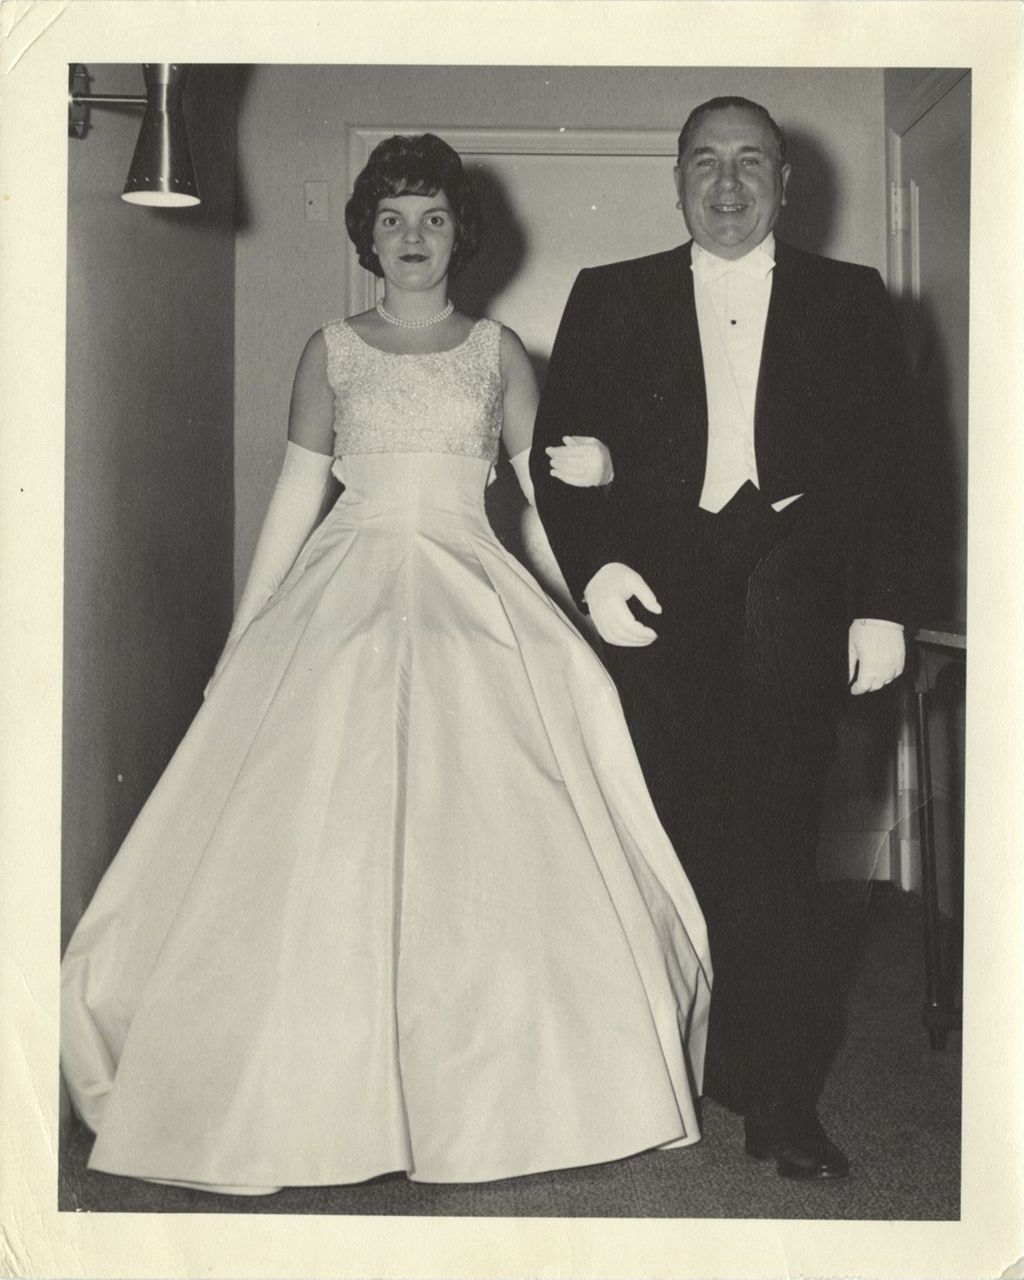 Miniature of Eleanor R. and Richard J. Daley dressed for Presentation Ball